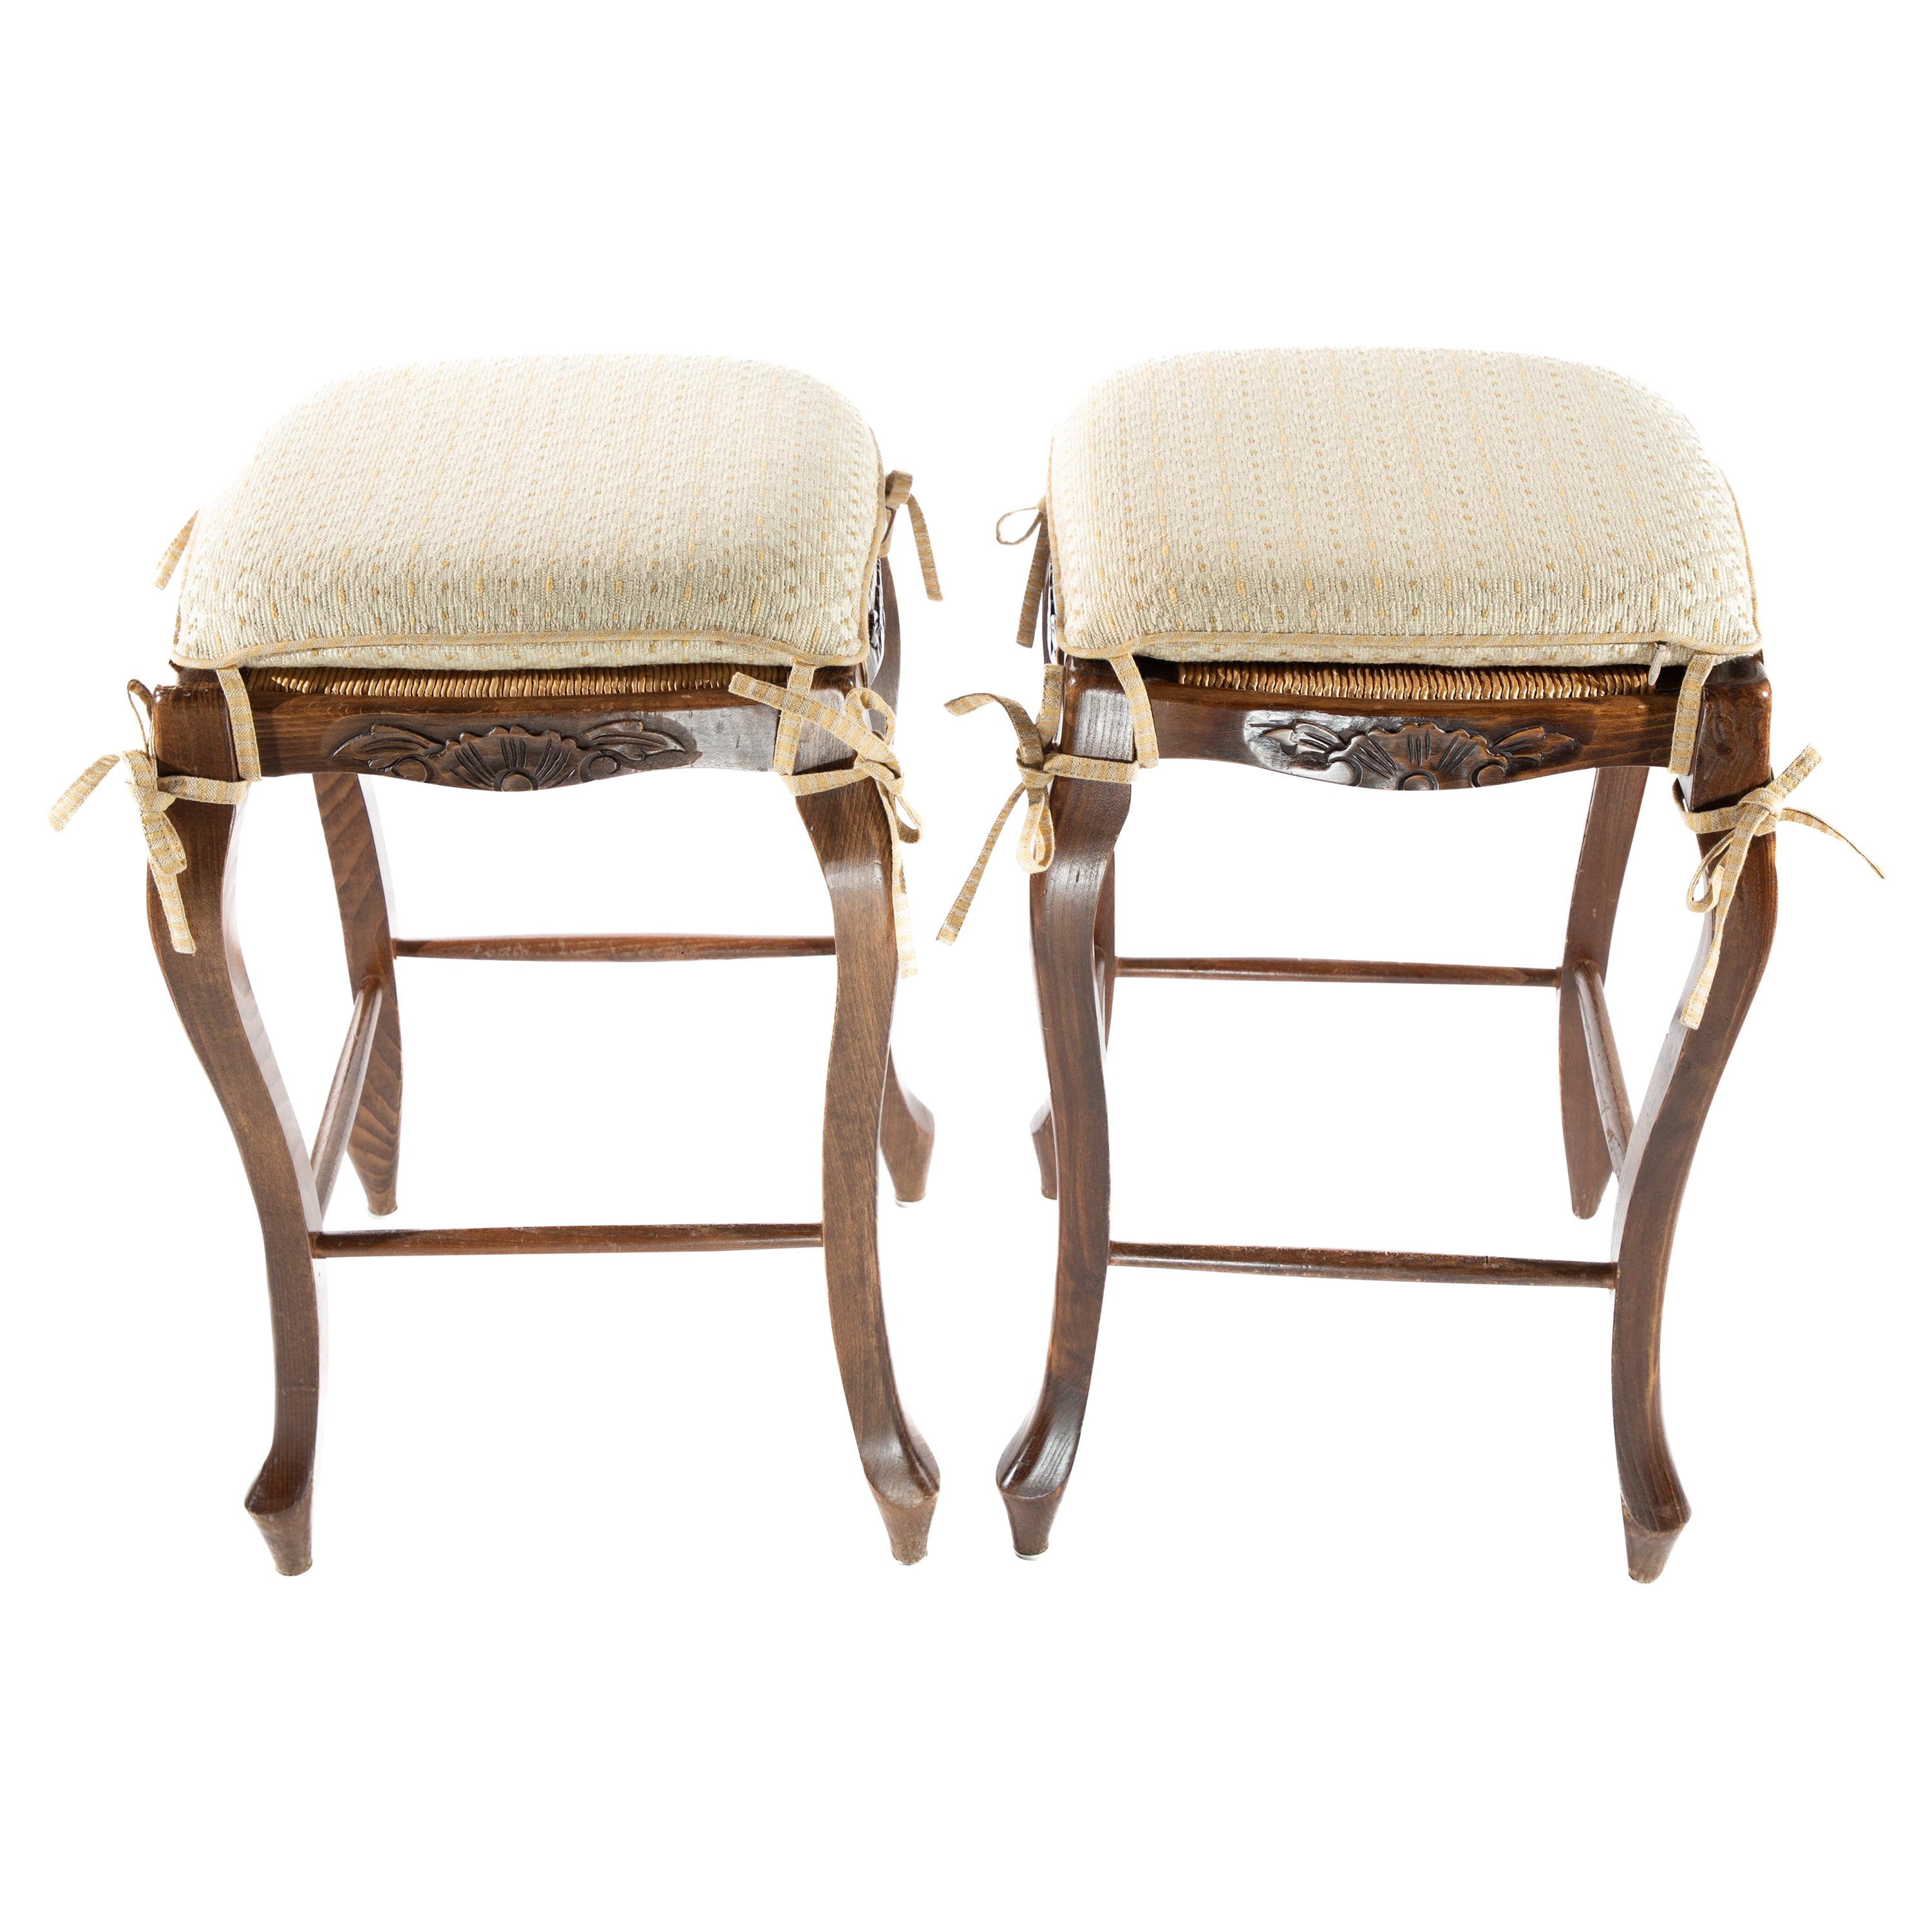 Pair of Wooden Barstools with Rush Woven Seats and Upholstered Cushions For Sale